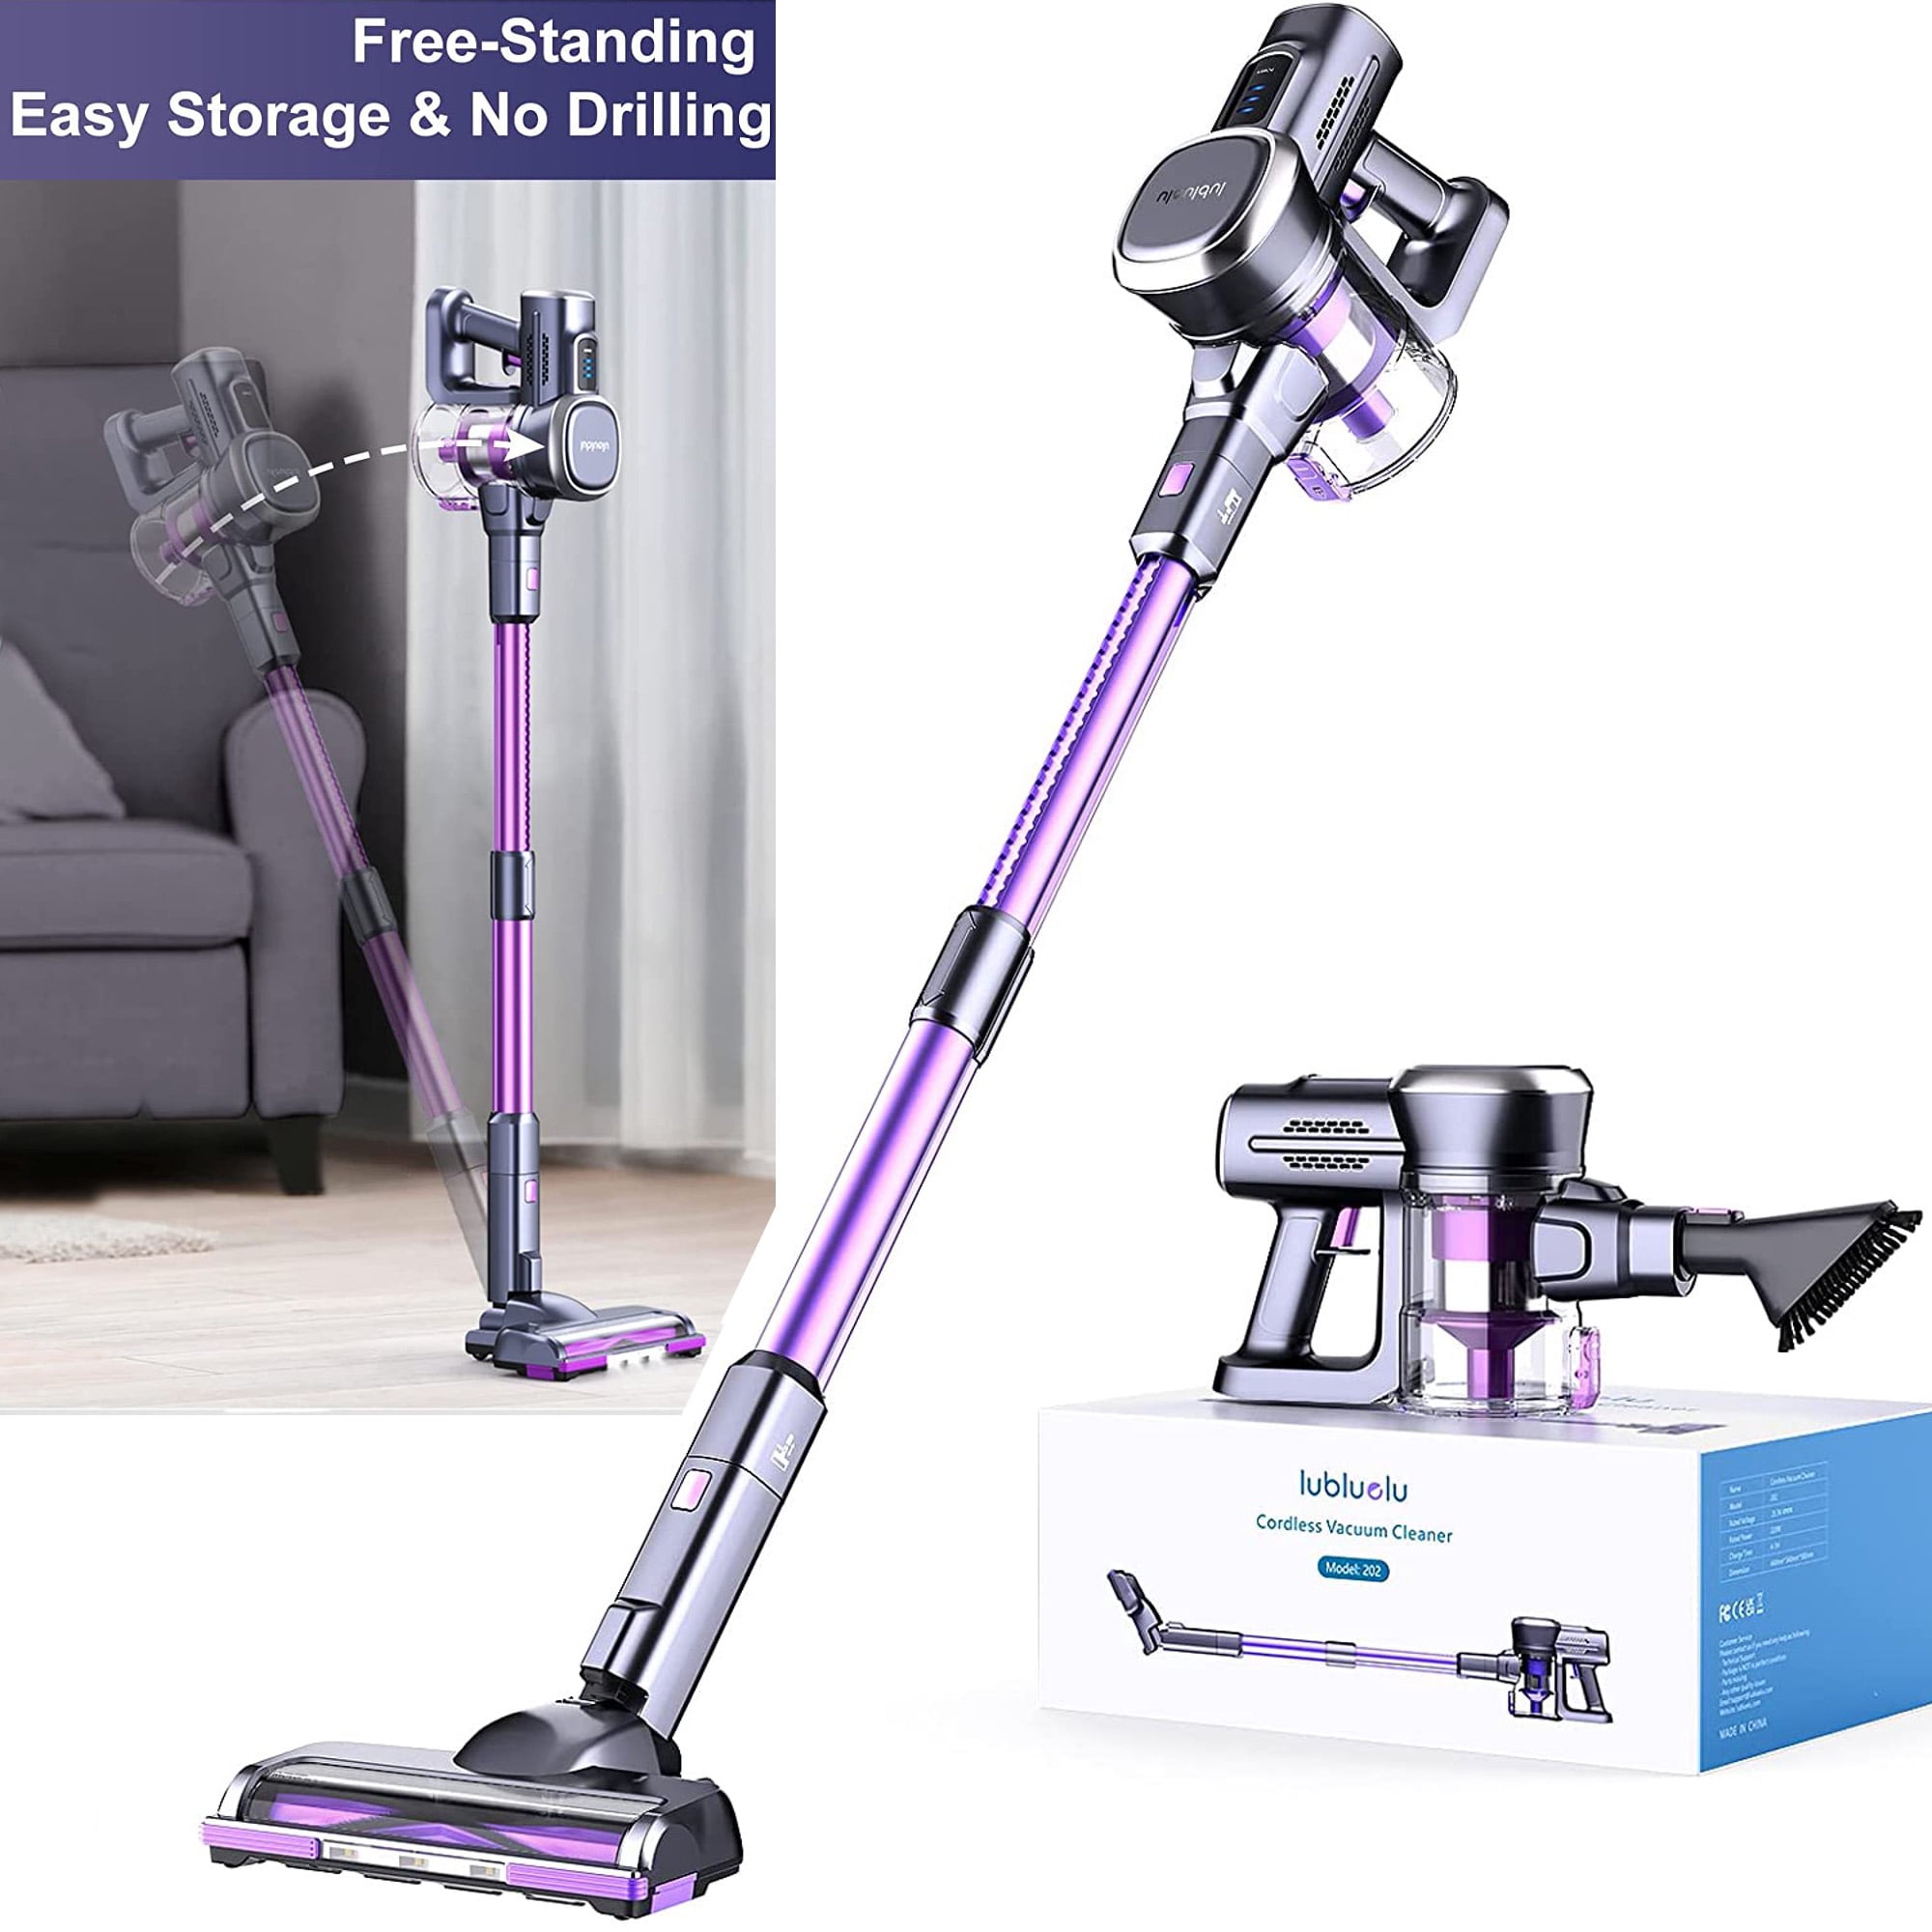 Carpet and Hard Floor Cleaning with 22.2V 2200mAh Rechargeable Li-ion Battery 130W Powerful Suction Brush for Pet Moterhead Cordless Stick Vacuum Cleaner Lightweight Handheld Vacuum 